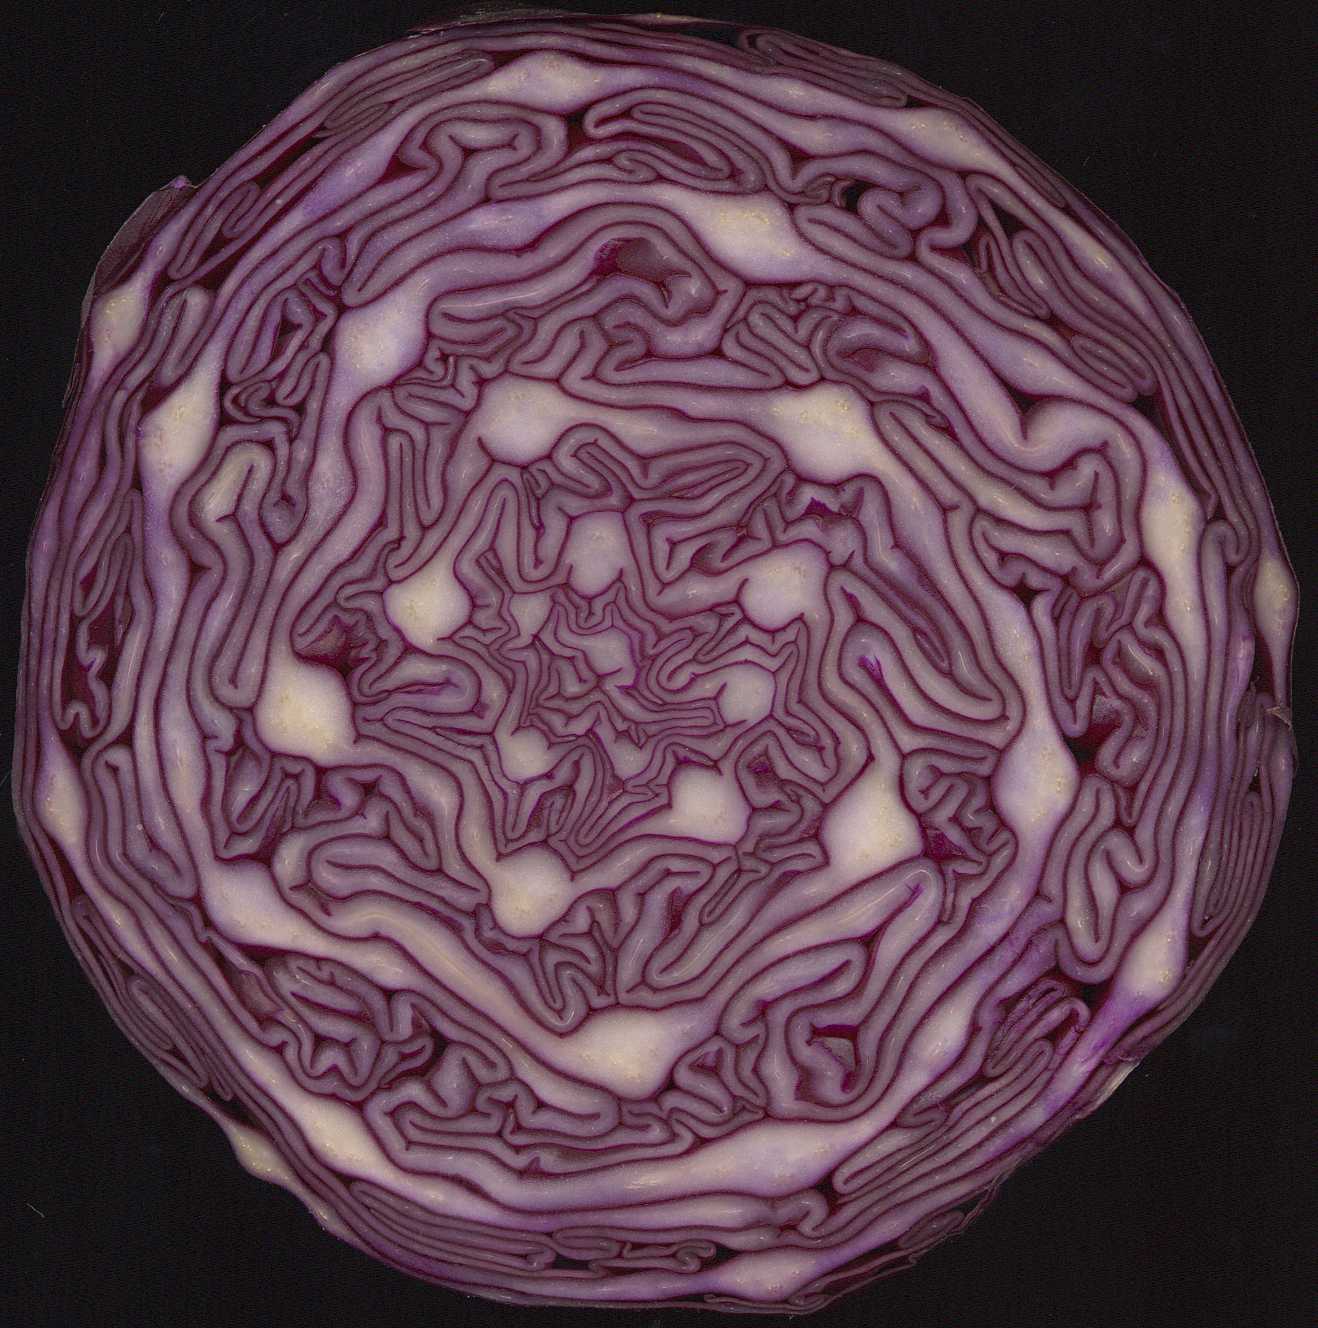 File:Red Cabbage cross section spirals.jpg - Wikipedia